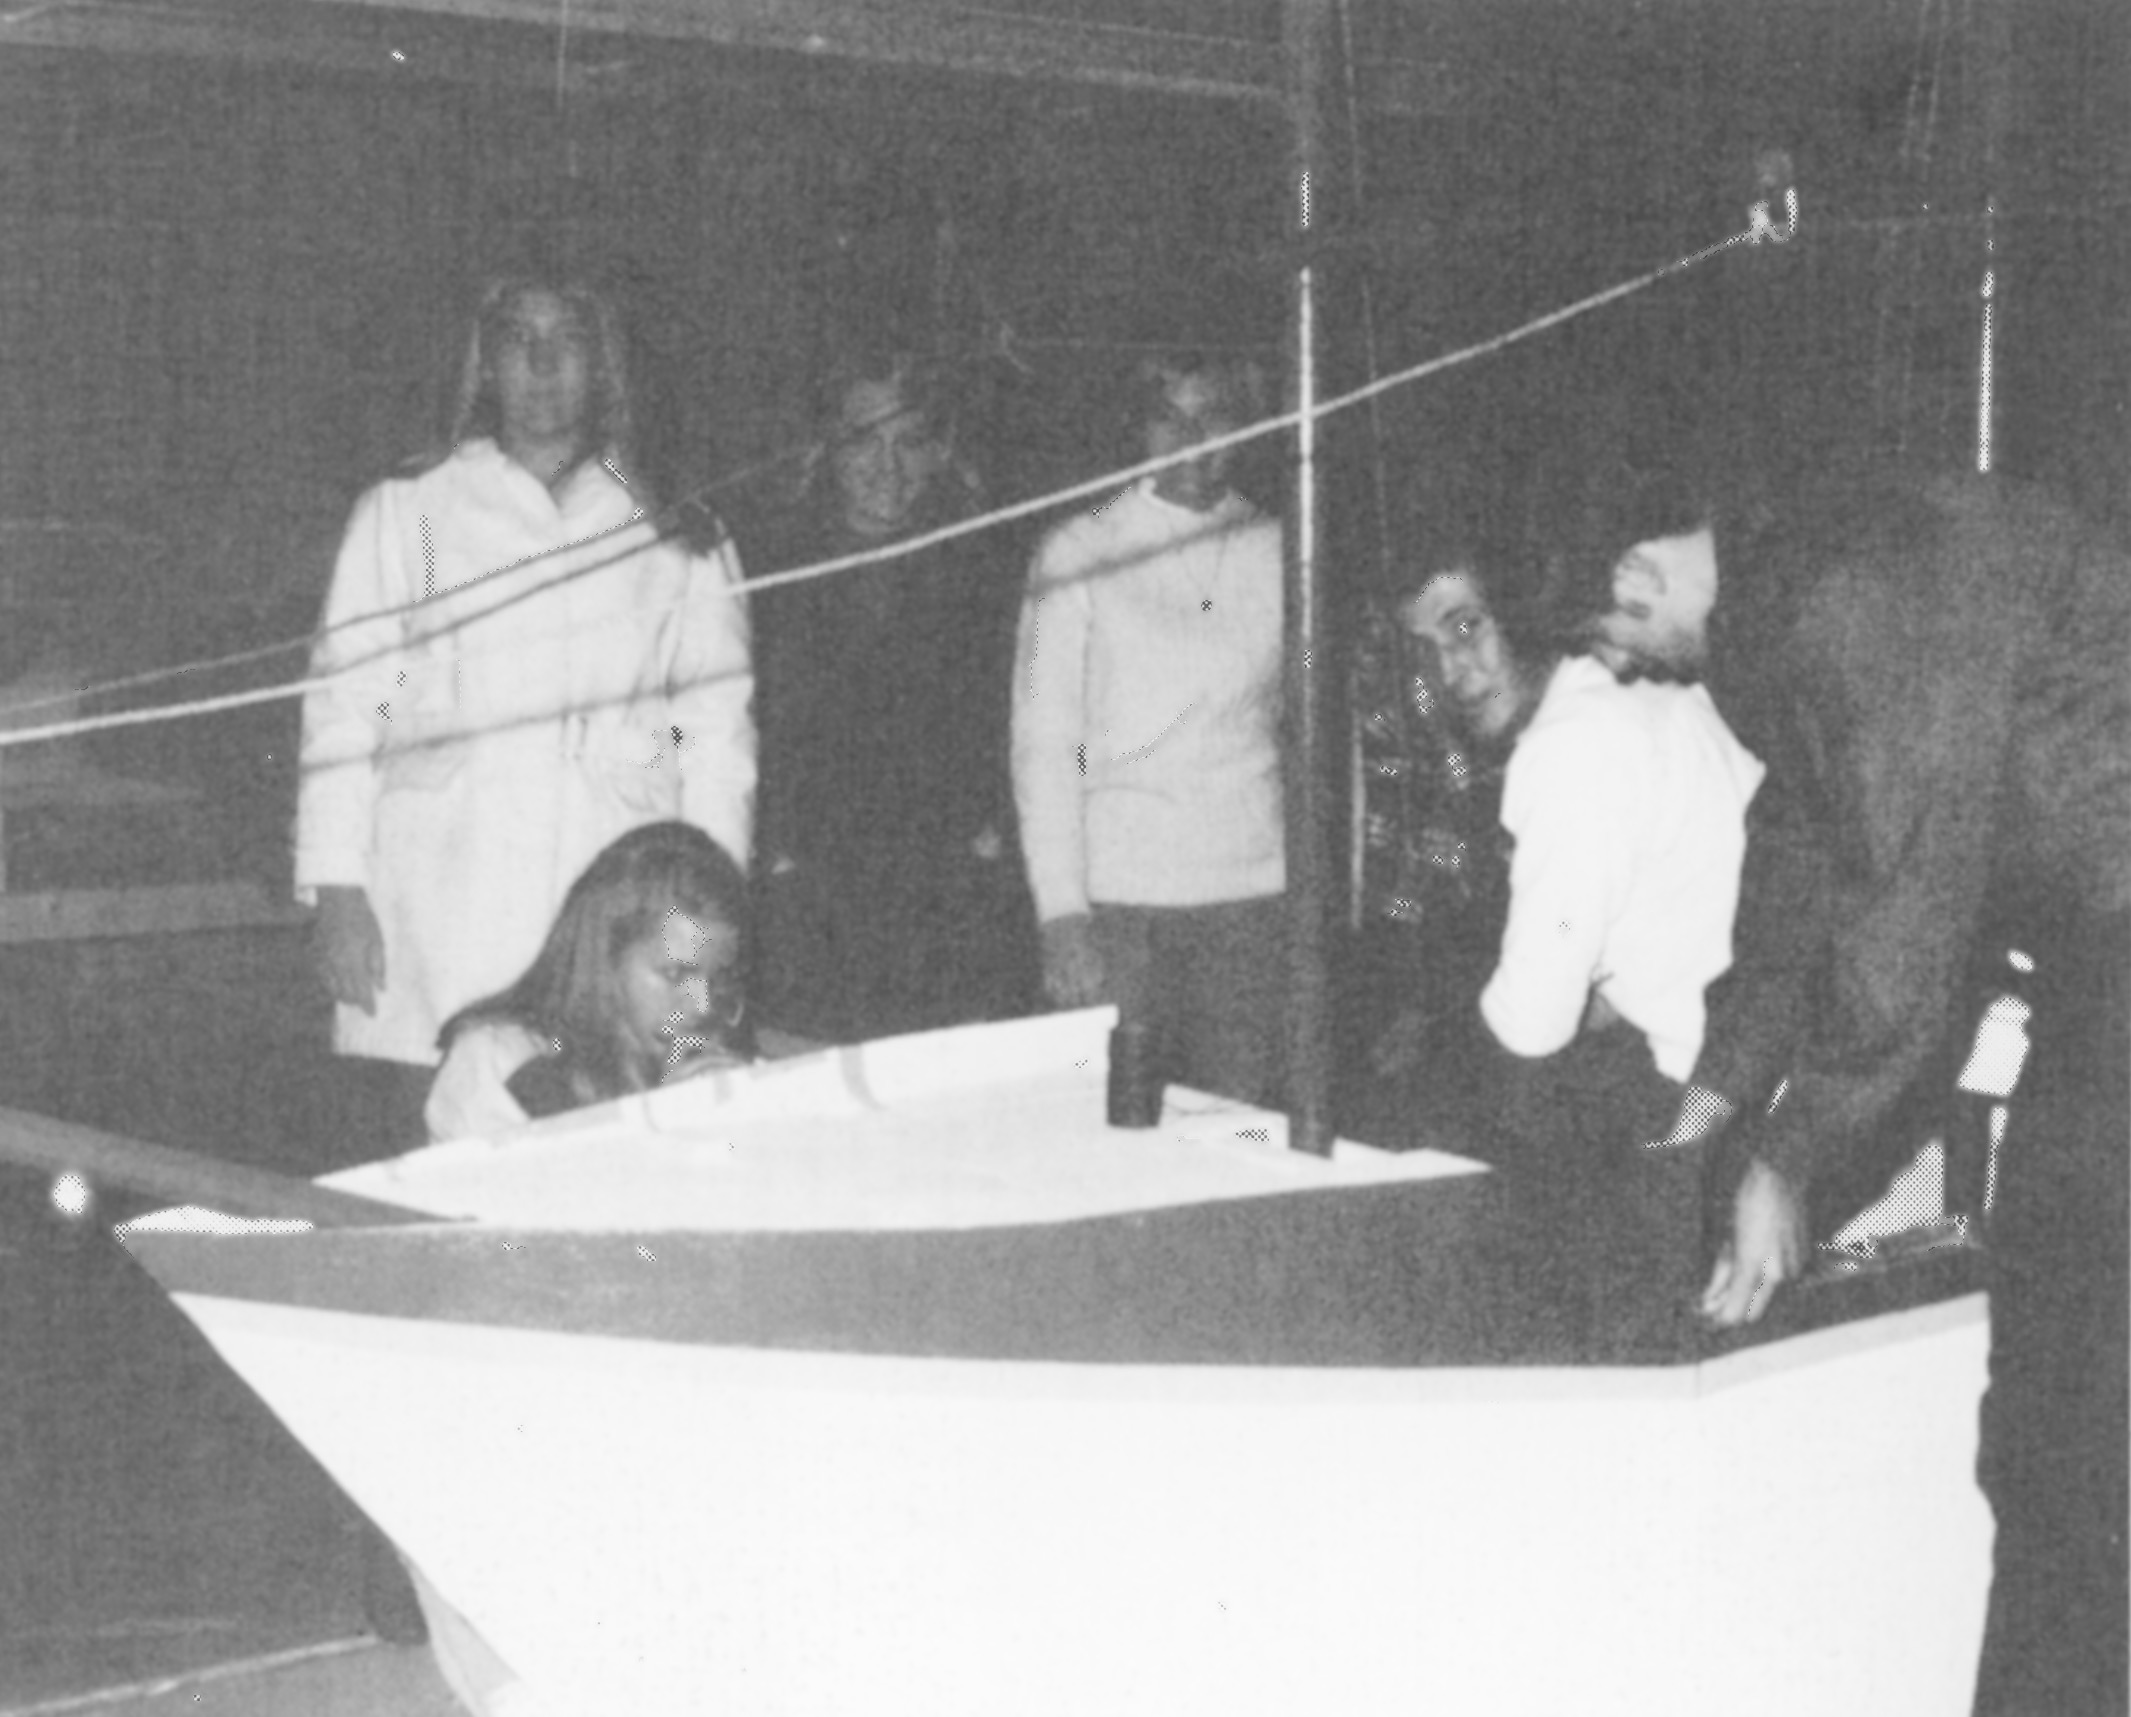 Building the Senior Float in Betsy's garage: ECHOES 1969.  From left - Betsy, Susan Meyers (kneeling), Cheryl Niebur and Linda Bergmeyer in shadows (I think), and Doug Allen in the white shirt. I am not sure who the guy on the right is. Help!